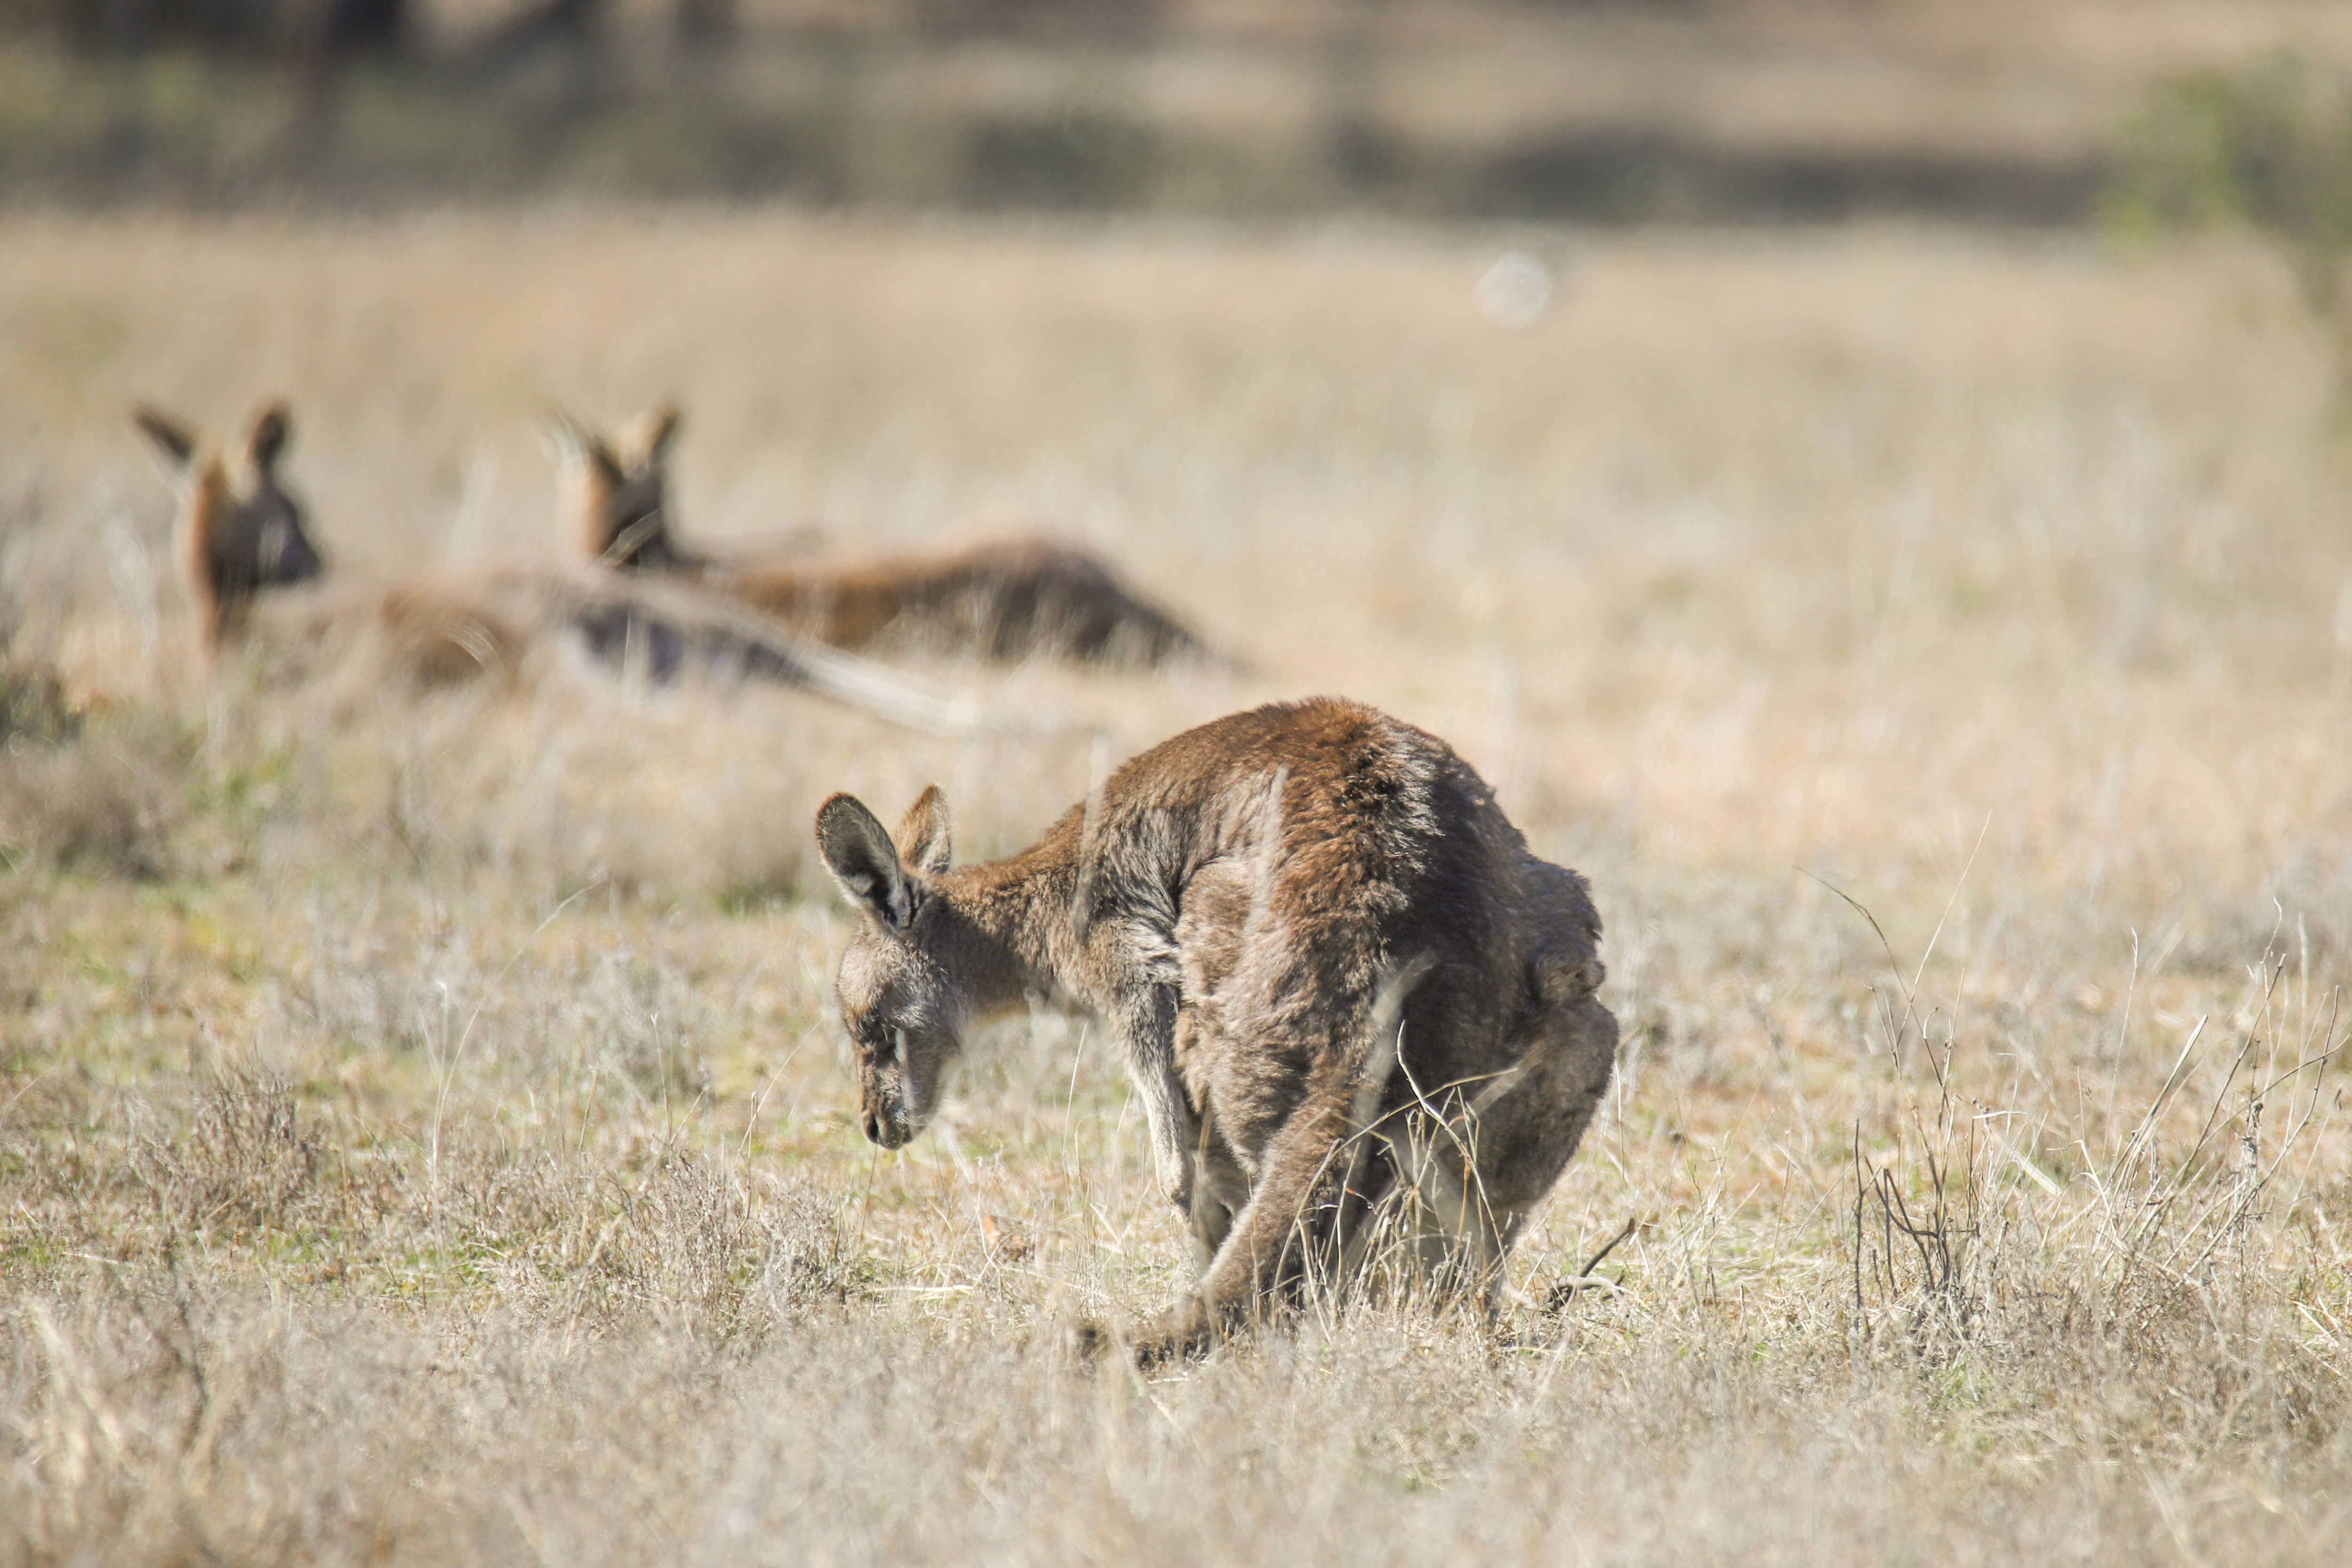 Australian Police are investigating the death of 14 kangaroos on the southern coast of the country